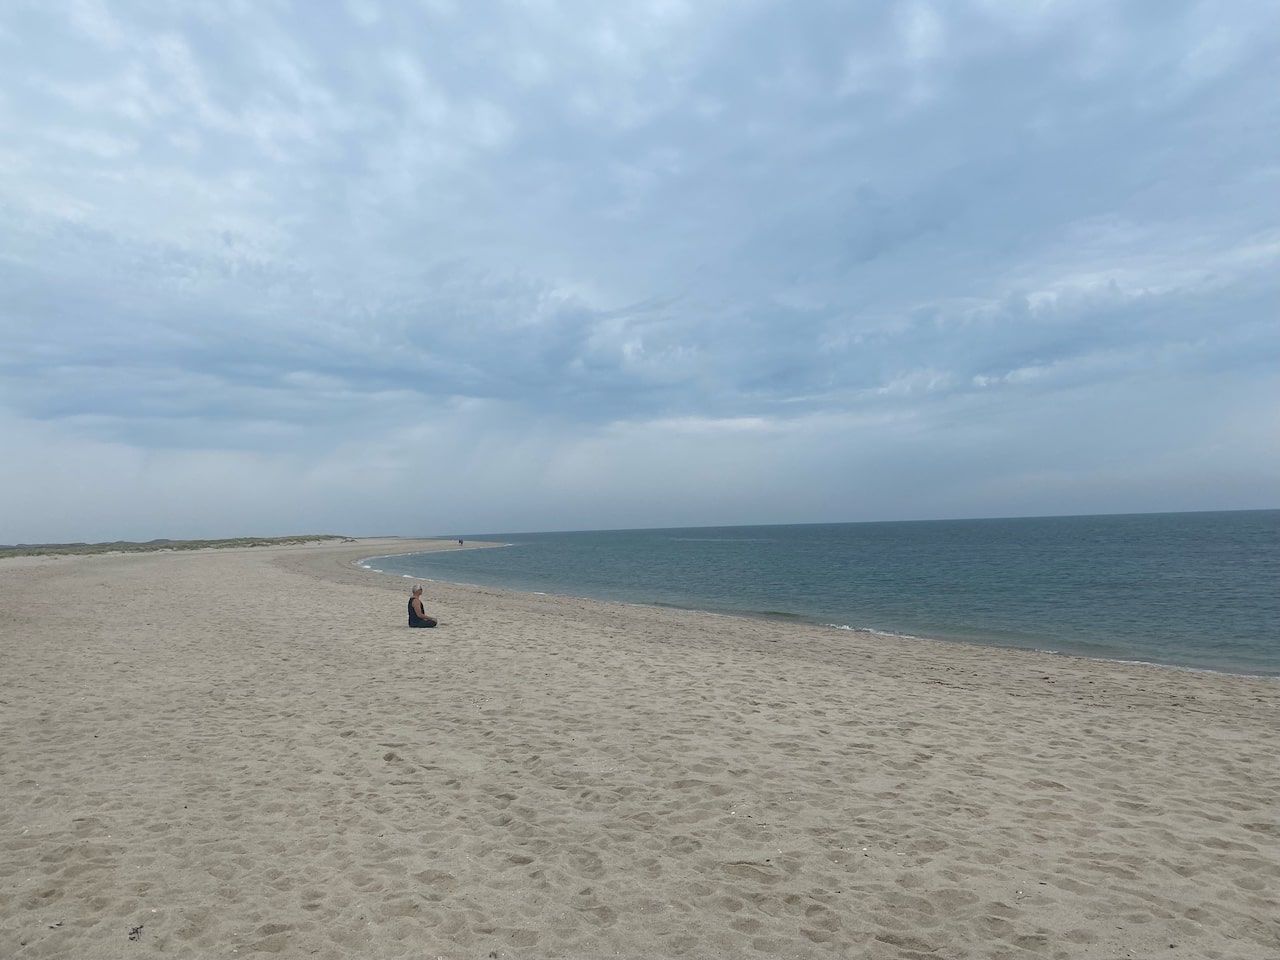 A person sits on a sandy beach under a cloudy sky and enjoys the peace and beauty of the natural landscape.